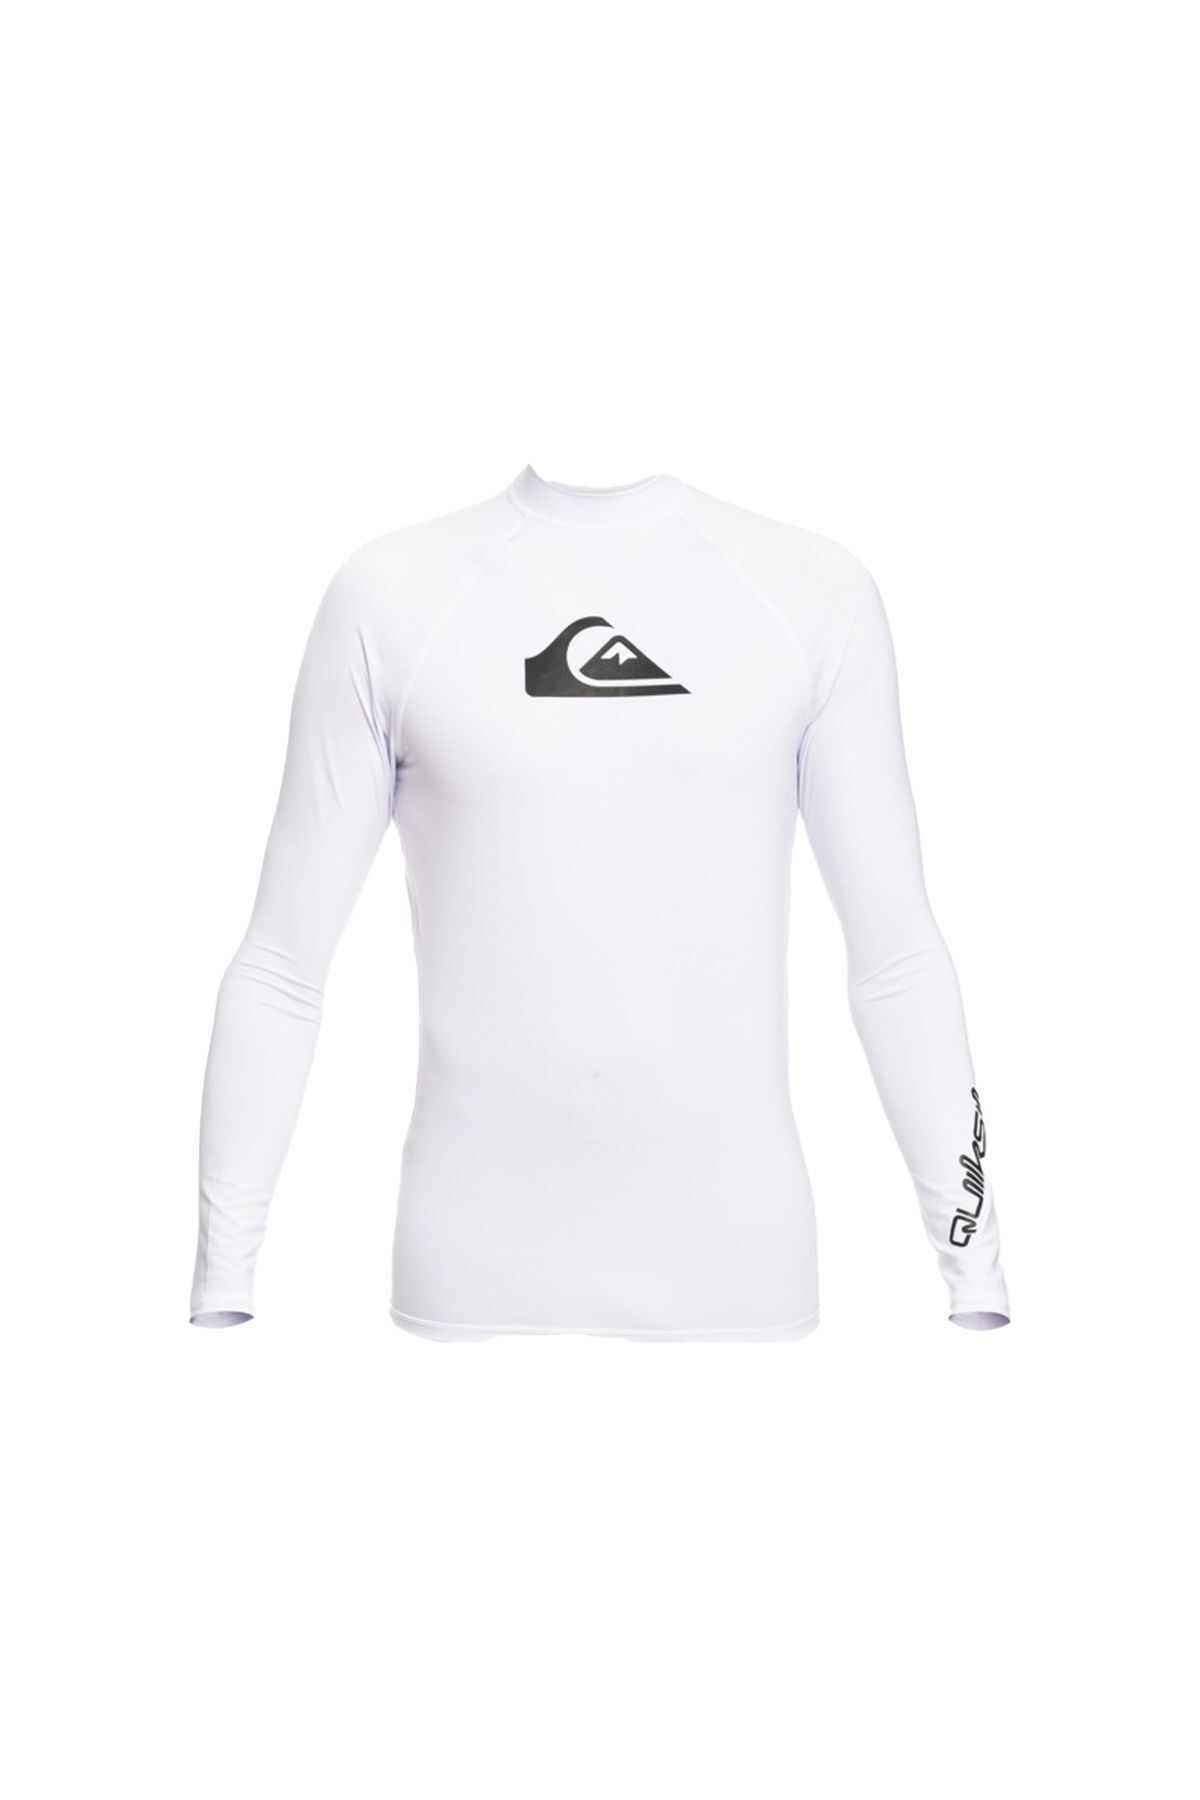 Quiksilver All Tıme Ls Youth